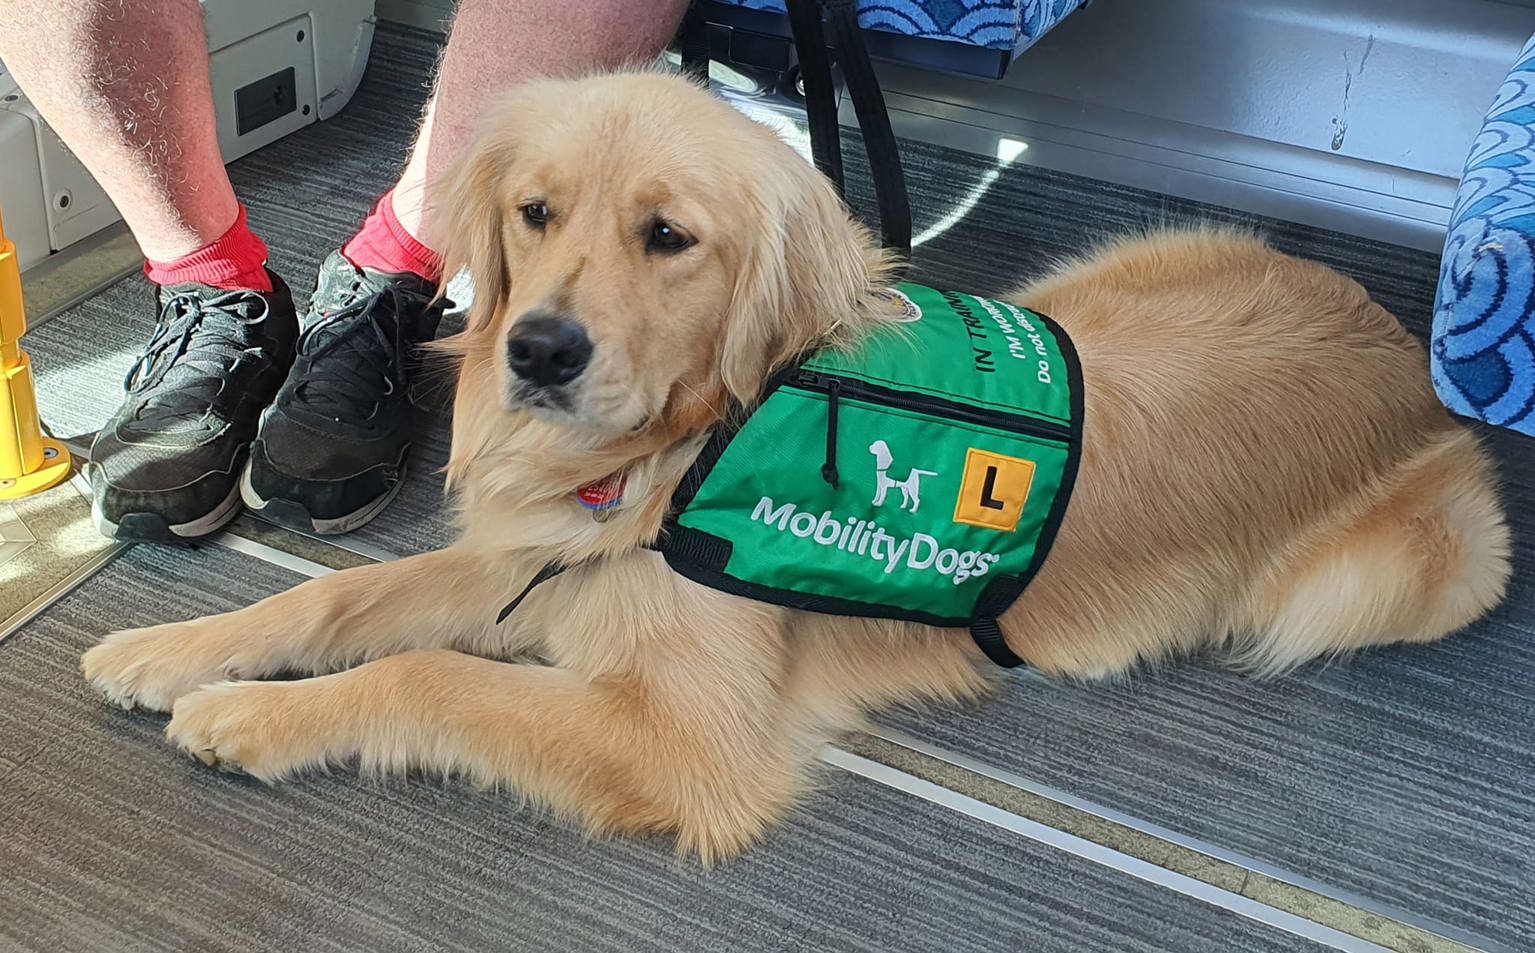 Image showing a disability assist dog wearing a green jacket.